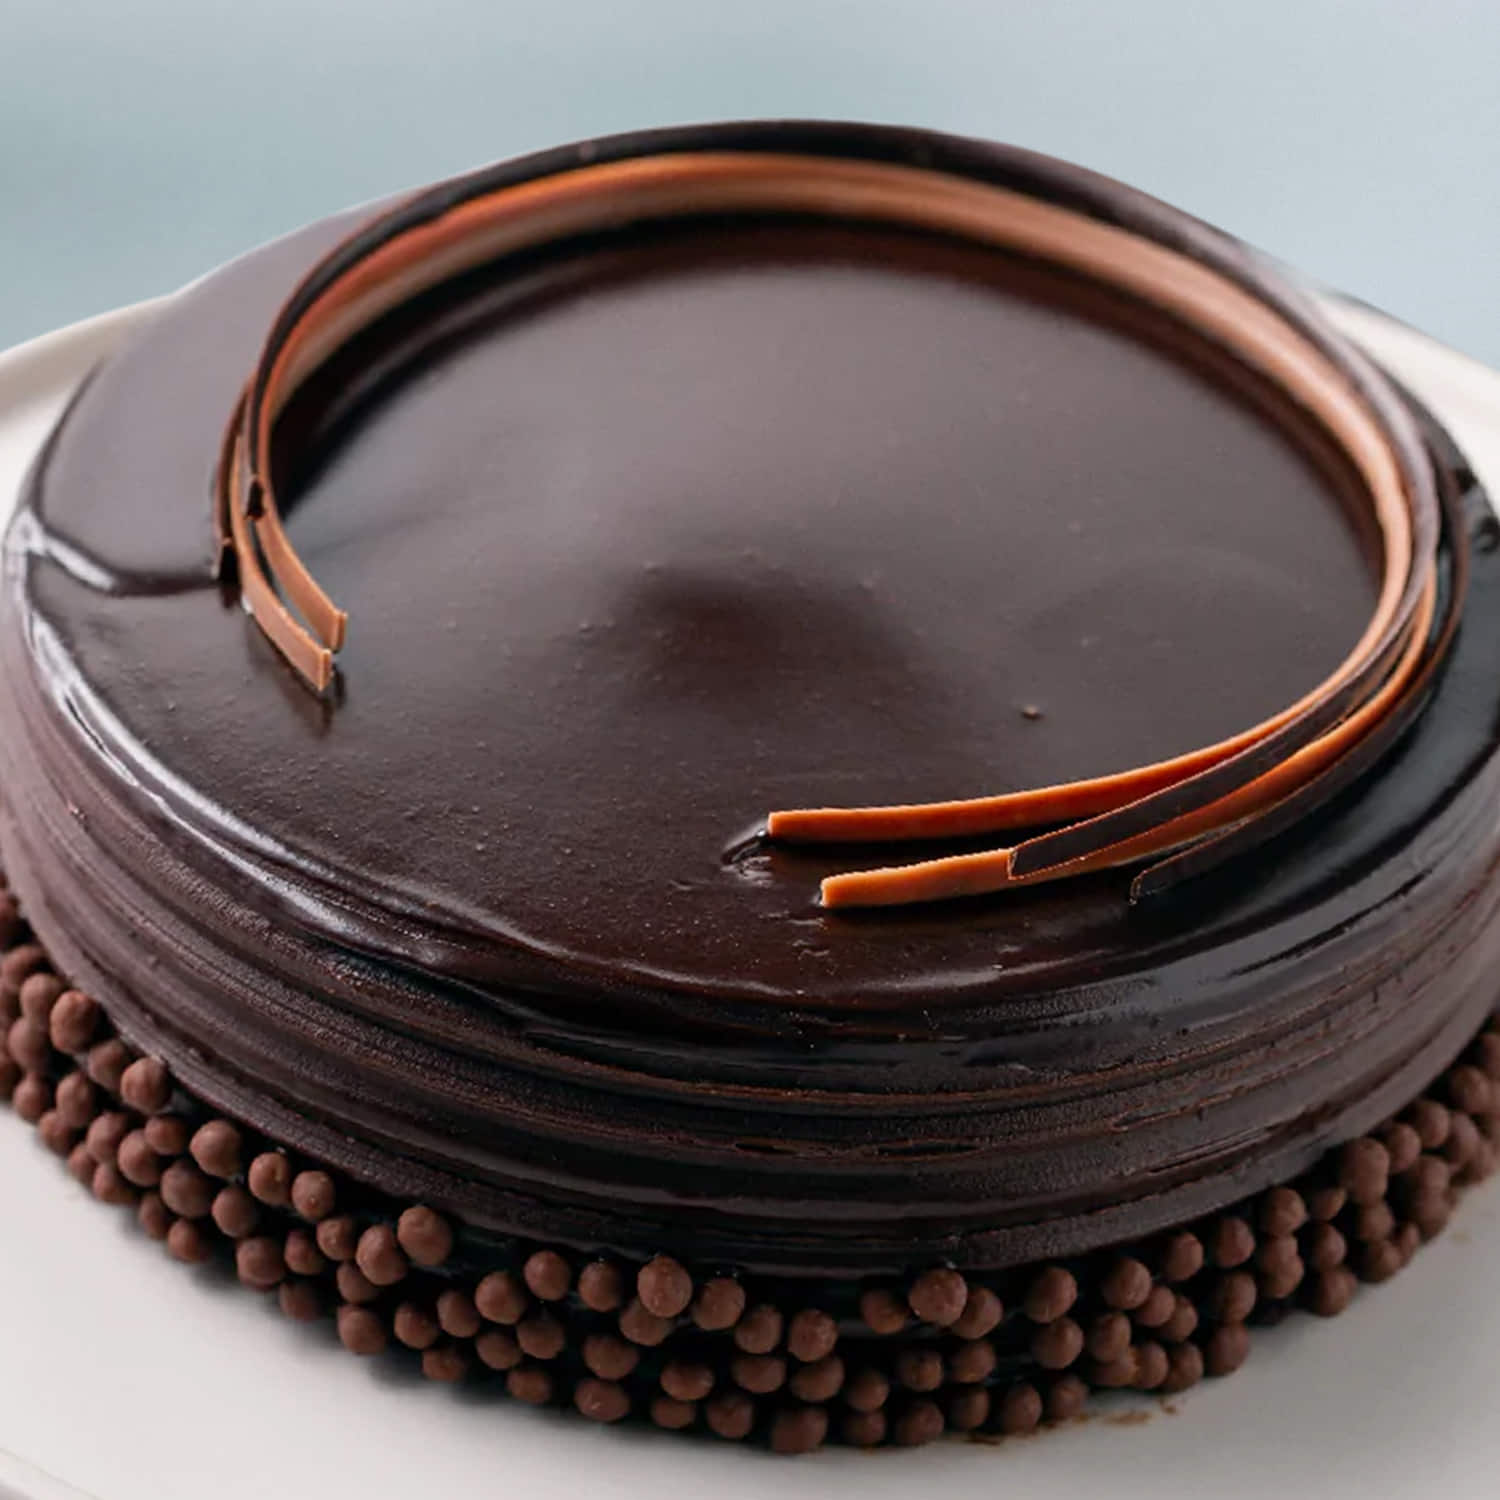 10 Chocolate Dessert Recipes to Delight Your Sweet Tooth - HubPages